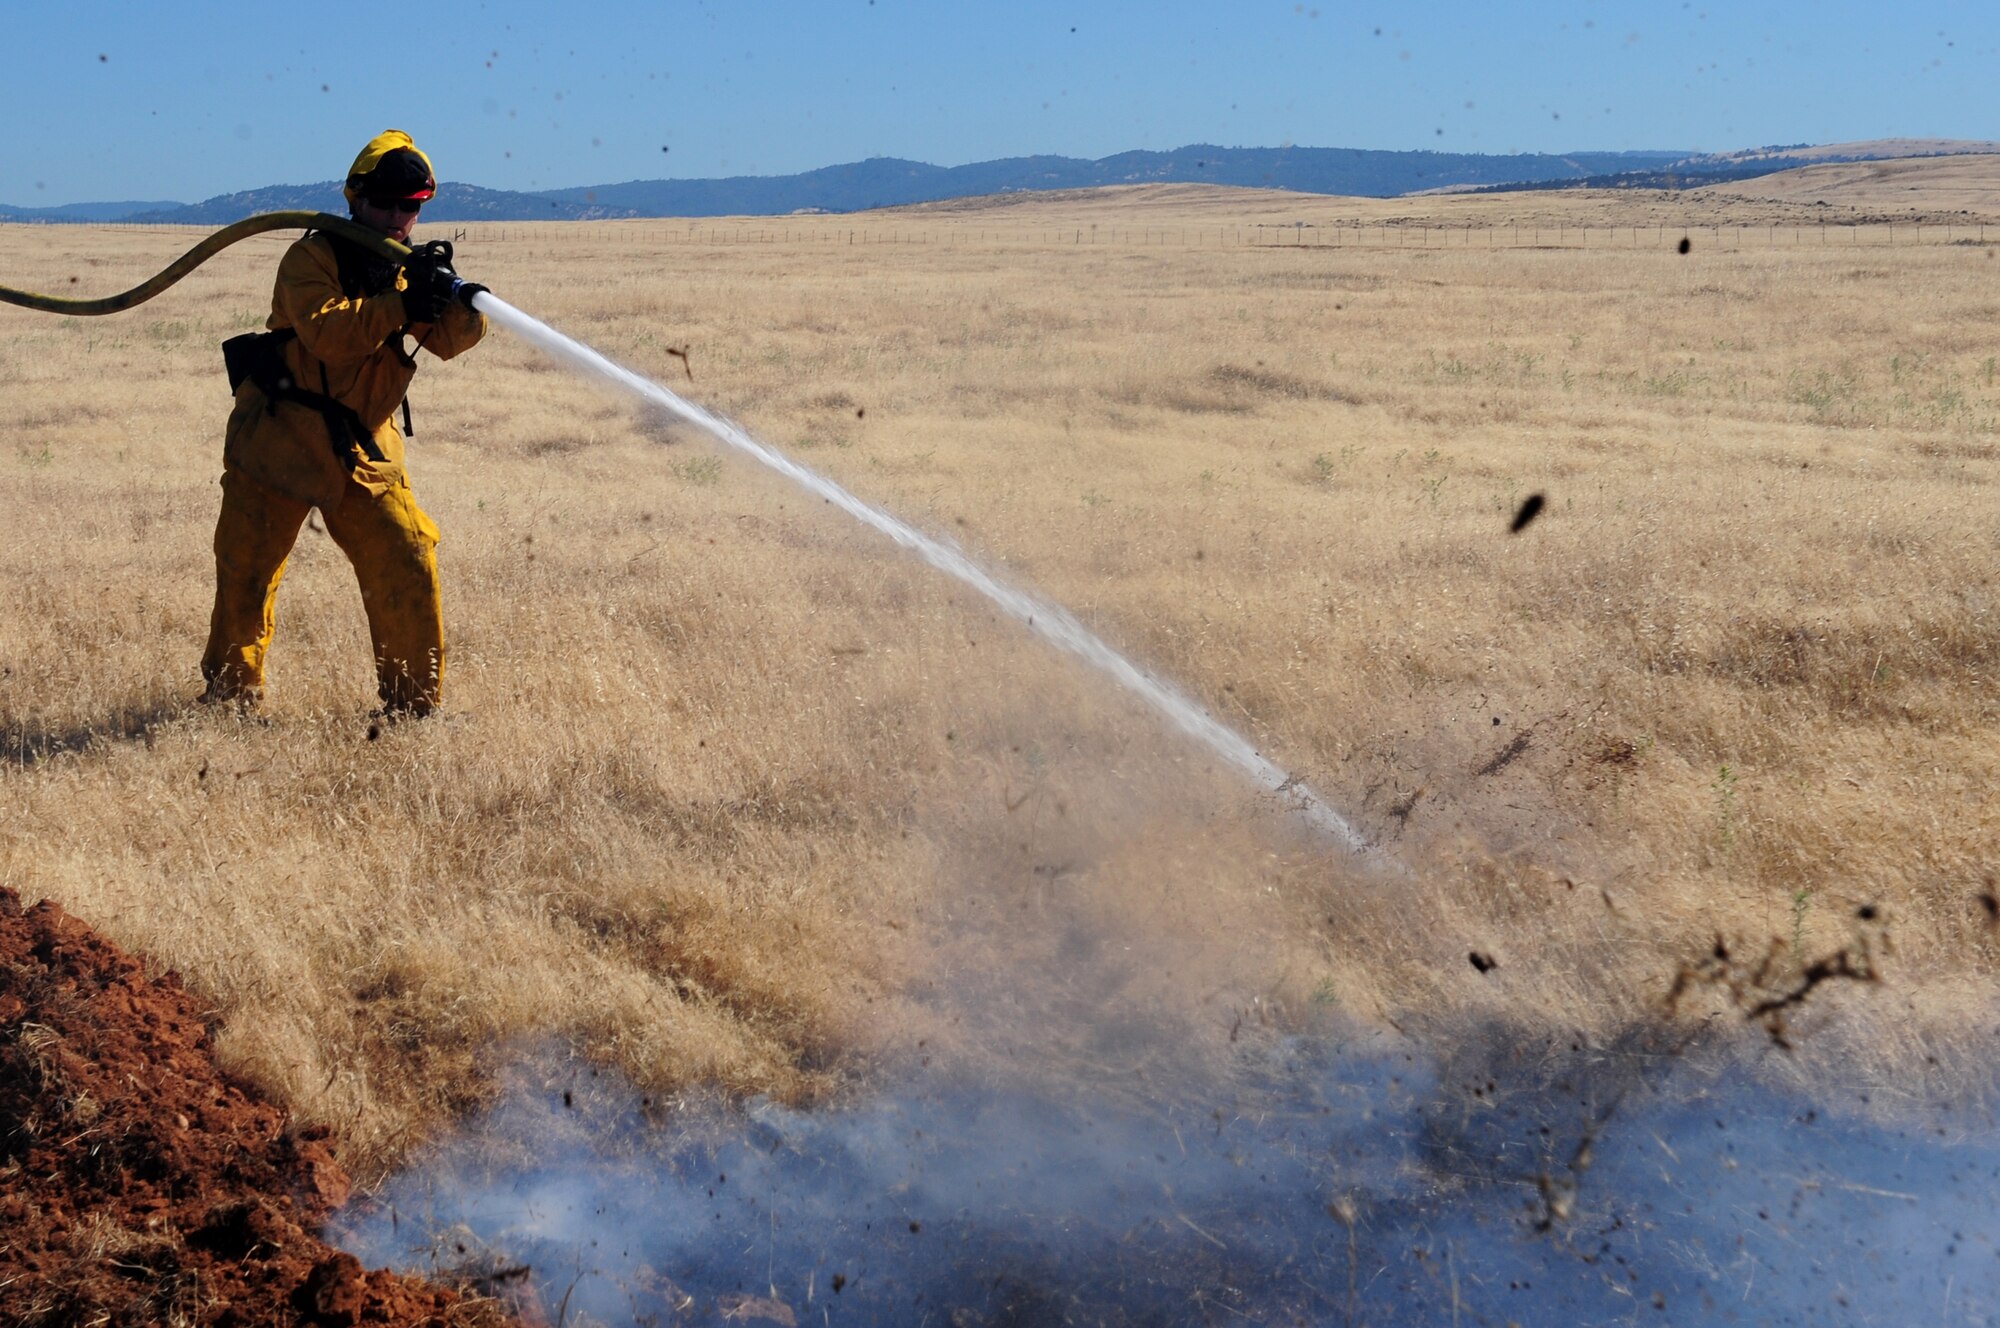 Staff Sgt. Kyle Dobler, 9th Civil Engineering Squadron firefighter, extinguishes a flame at the M-60 range during a prescribed burn on Beale Air Force Base Calif., June 27, 2013. Brush fires on Beale occur often during the summer months. (U.S. Air Force photo by Airman 1st Class Bobby Cummings/Released)